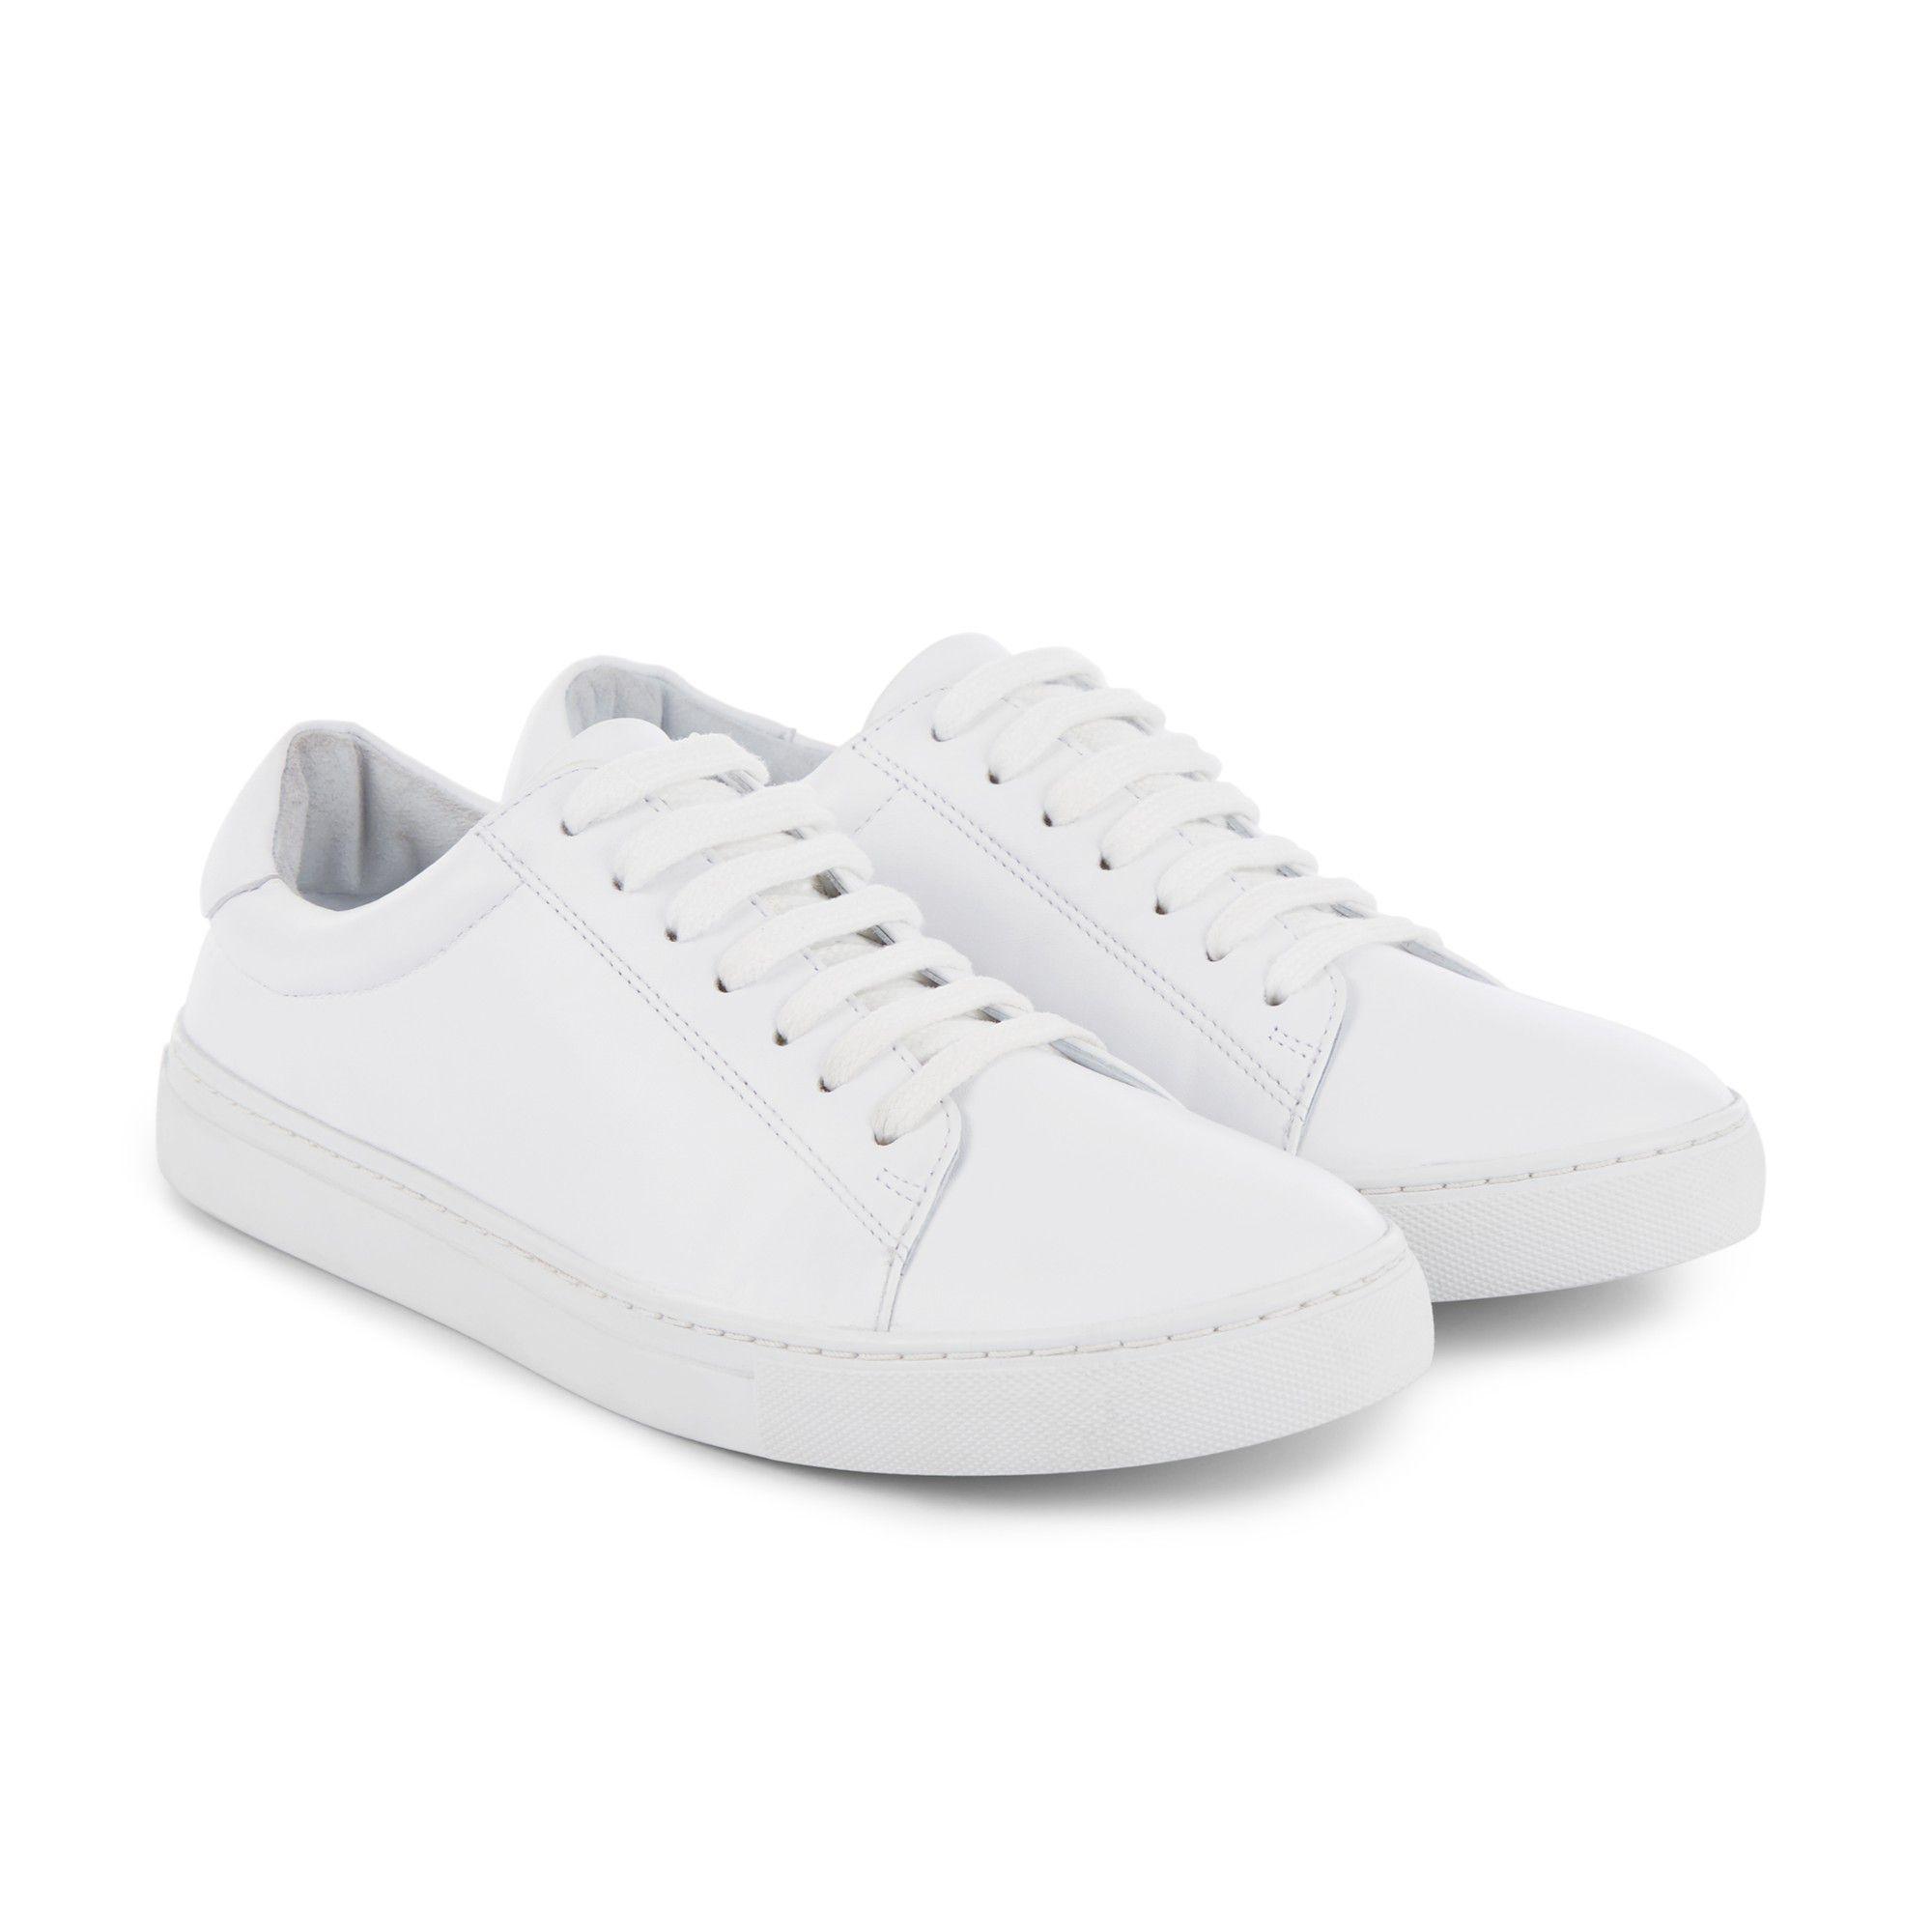 Hobbs Leather 'hollie' Trainers in White - Lyst